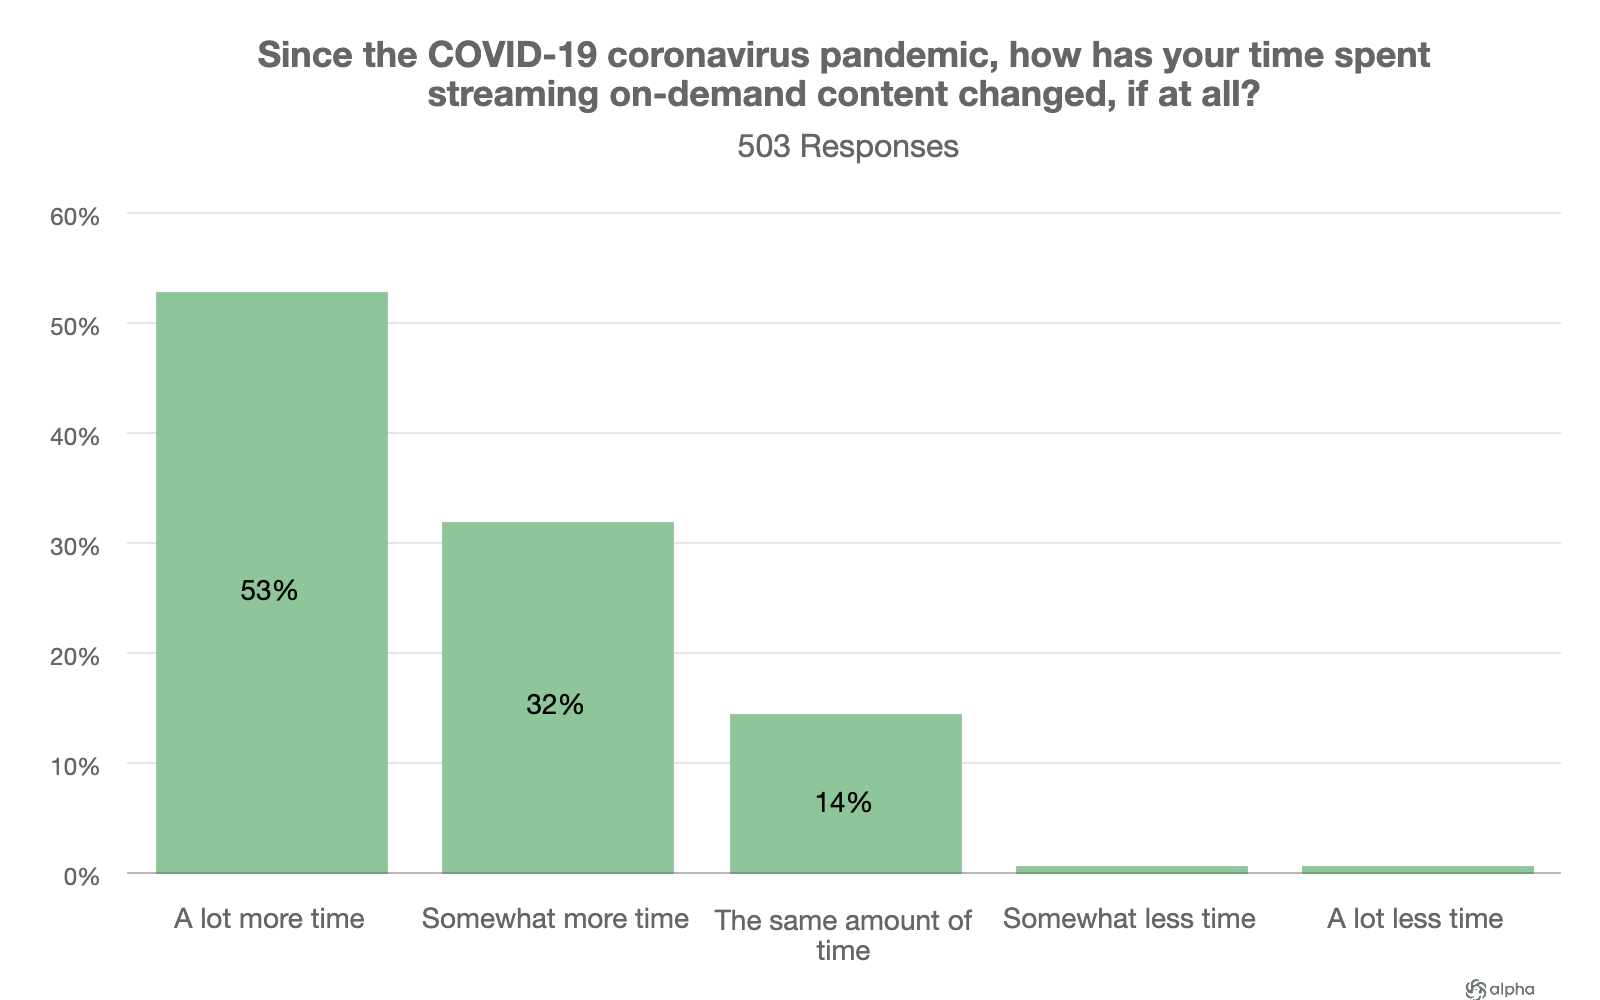 Has COVID-19 Created the Ideal Conditions for Cord Cutting and Binge Watching?